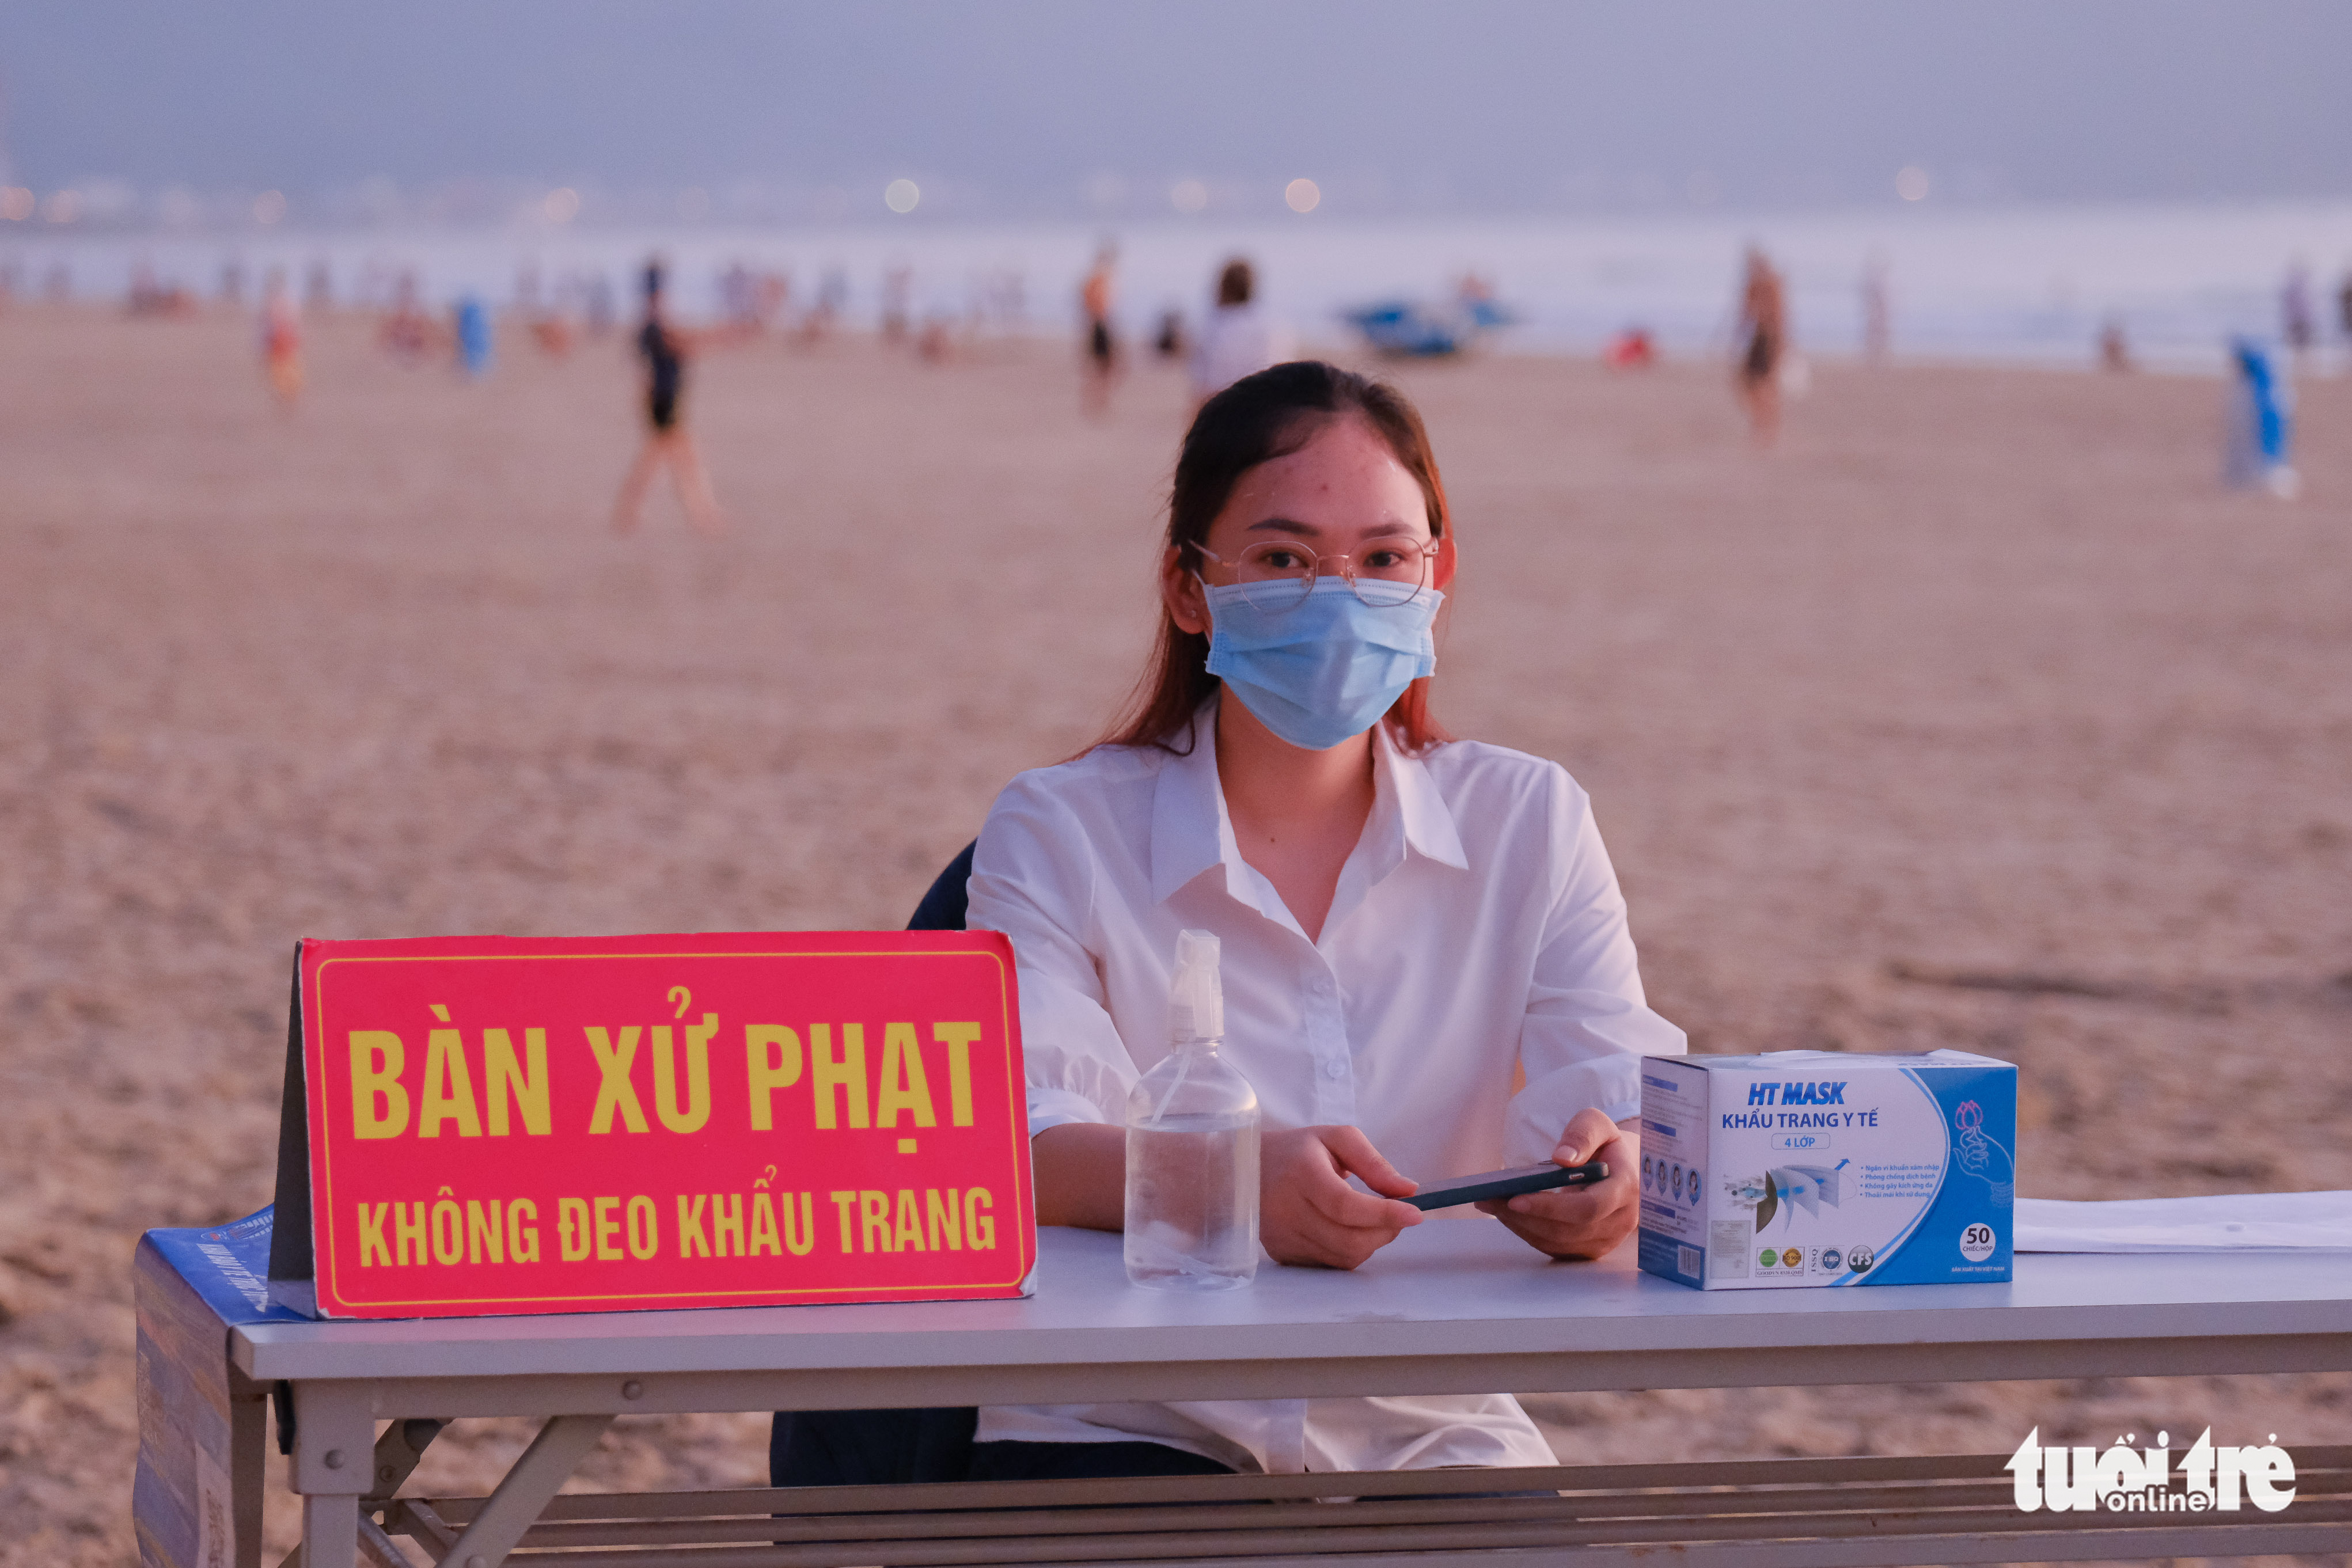 A woman is put in charge of imposing fines on violators of pandemic prevention and control regulations at a beach in Da Nang, September 30, 2021. Photo: Tan Luc / Tuoi Tre